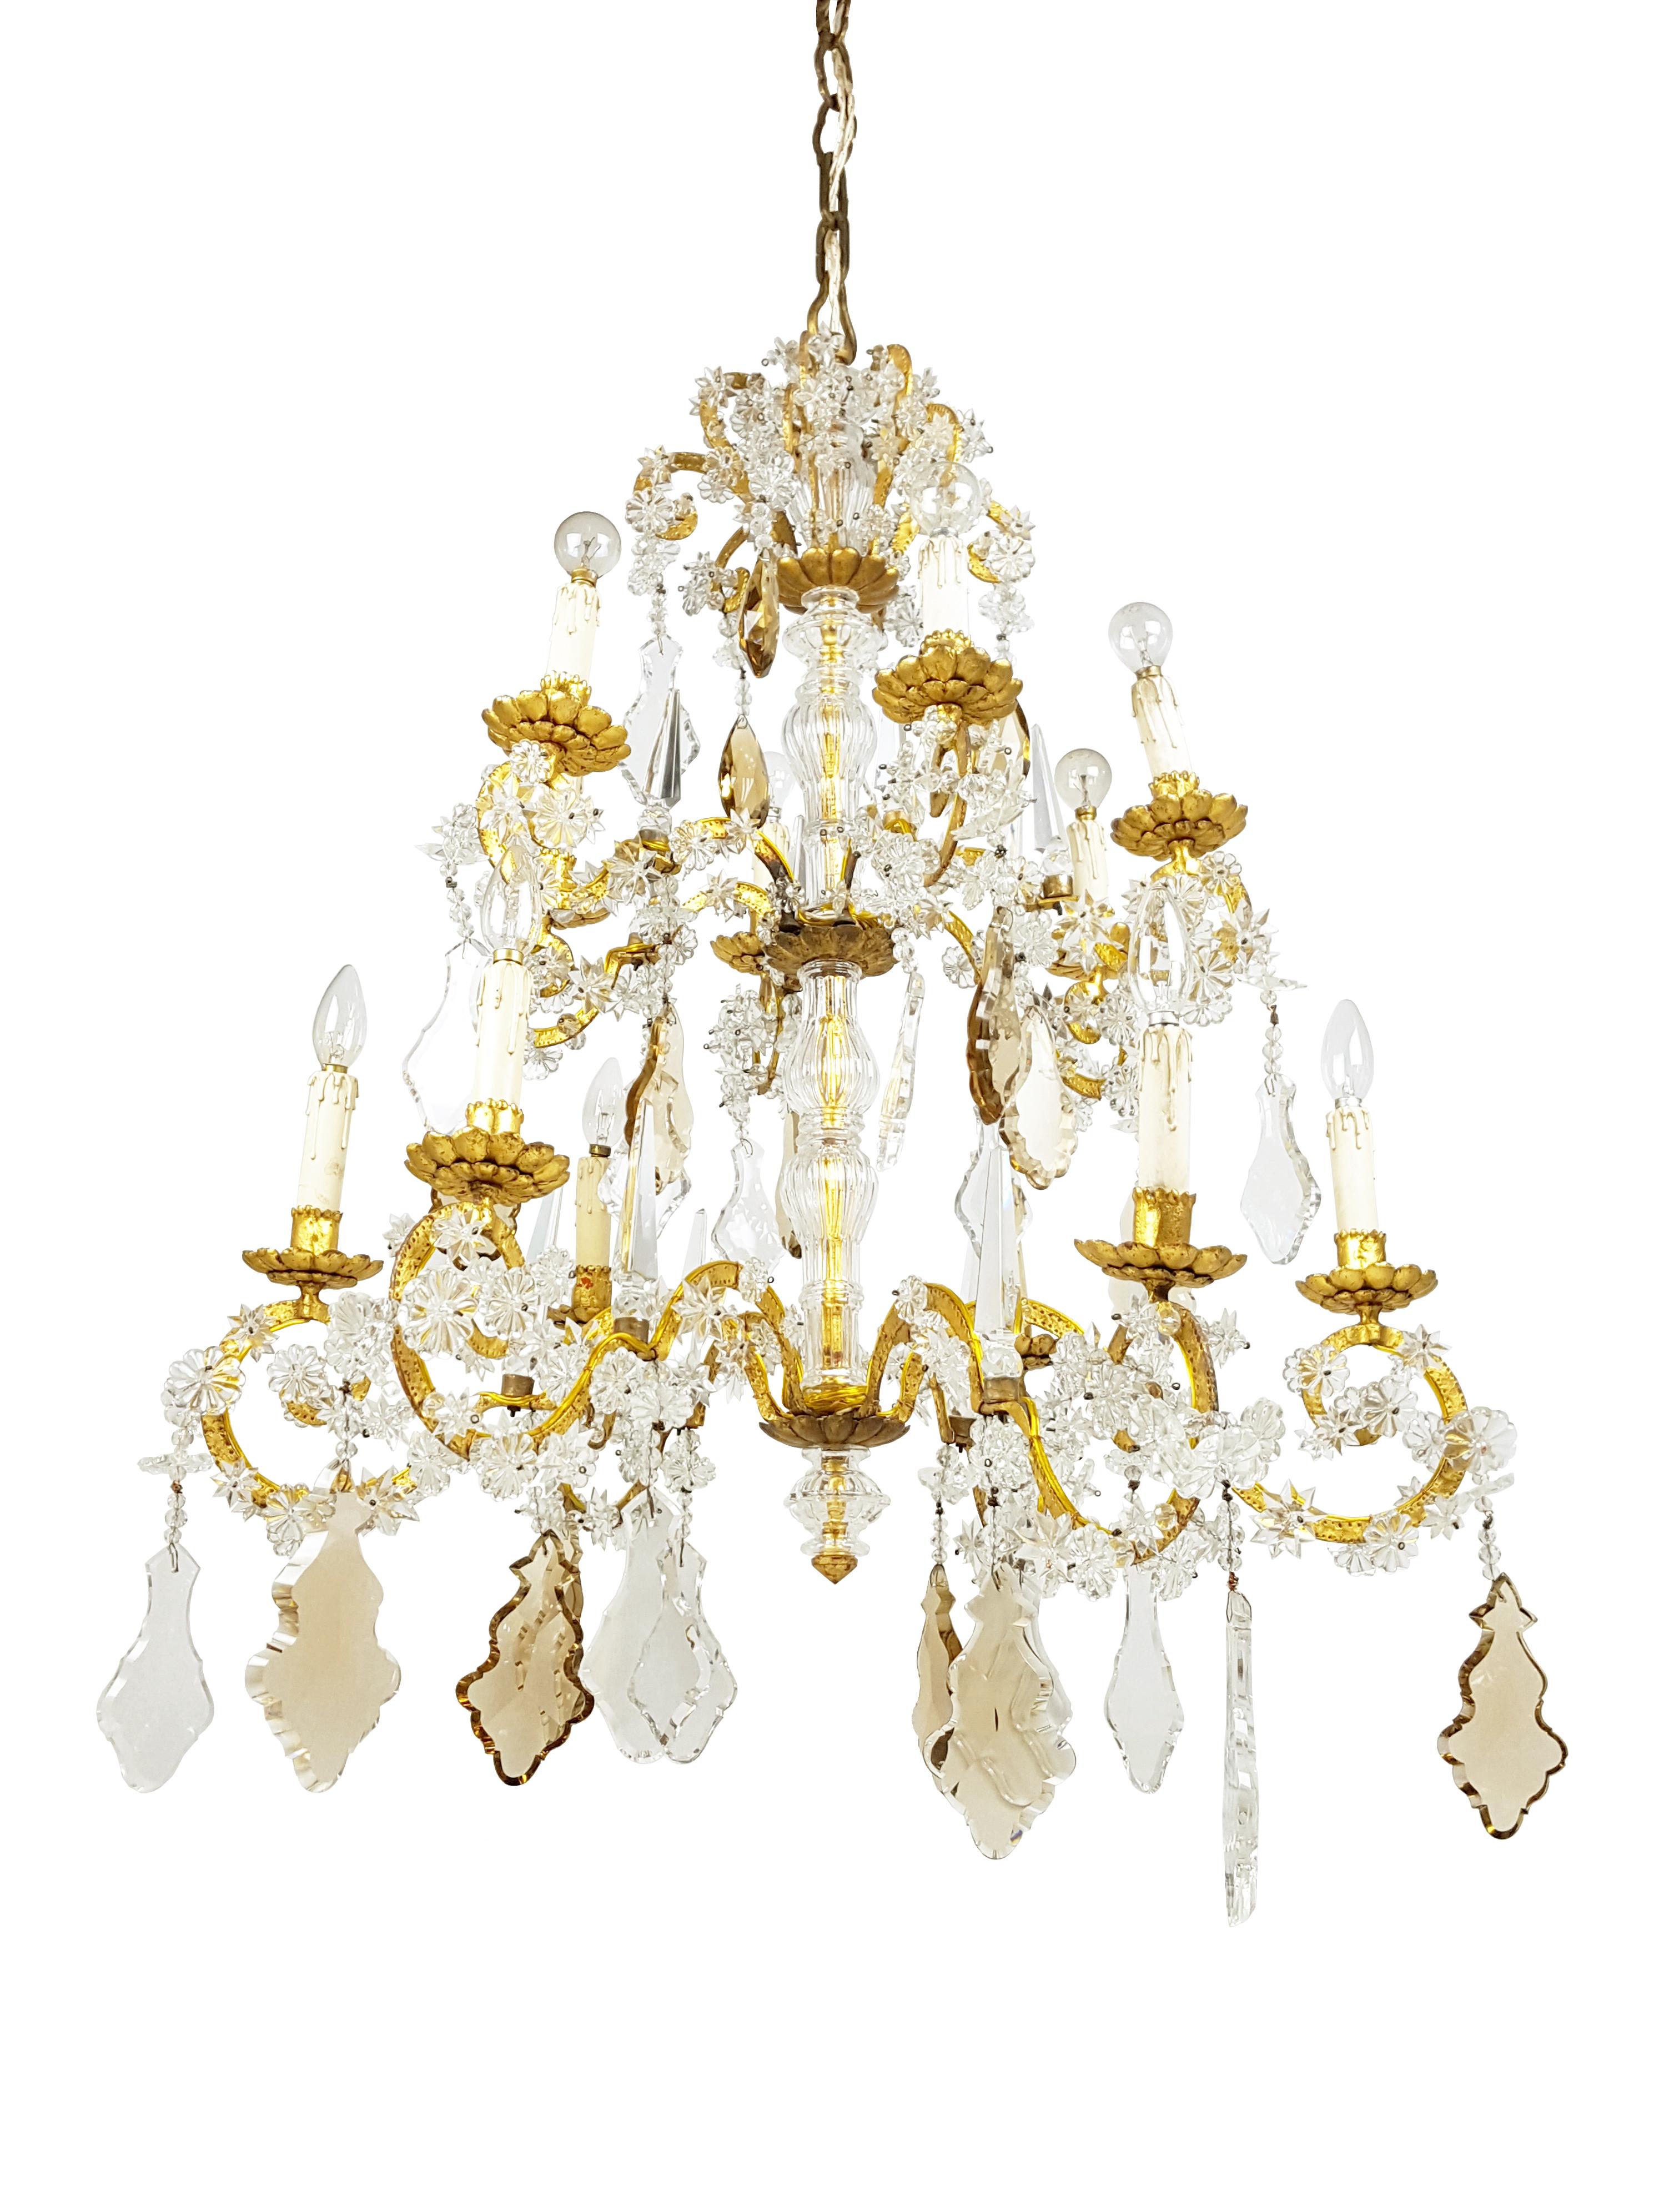 Pair of Italian Gold Leaf Metal and Faceted Crystal Deco Sconces For Sale 7